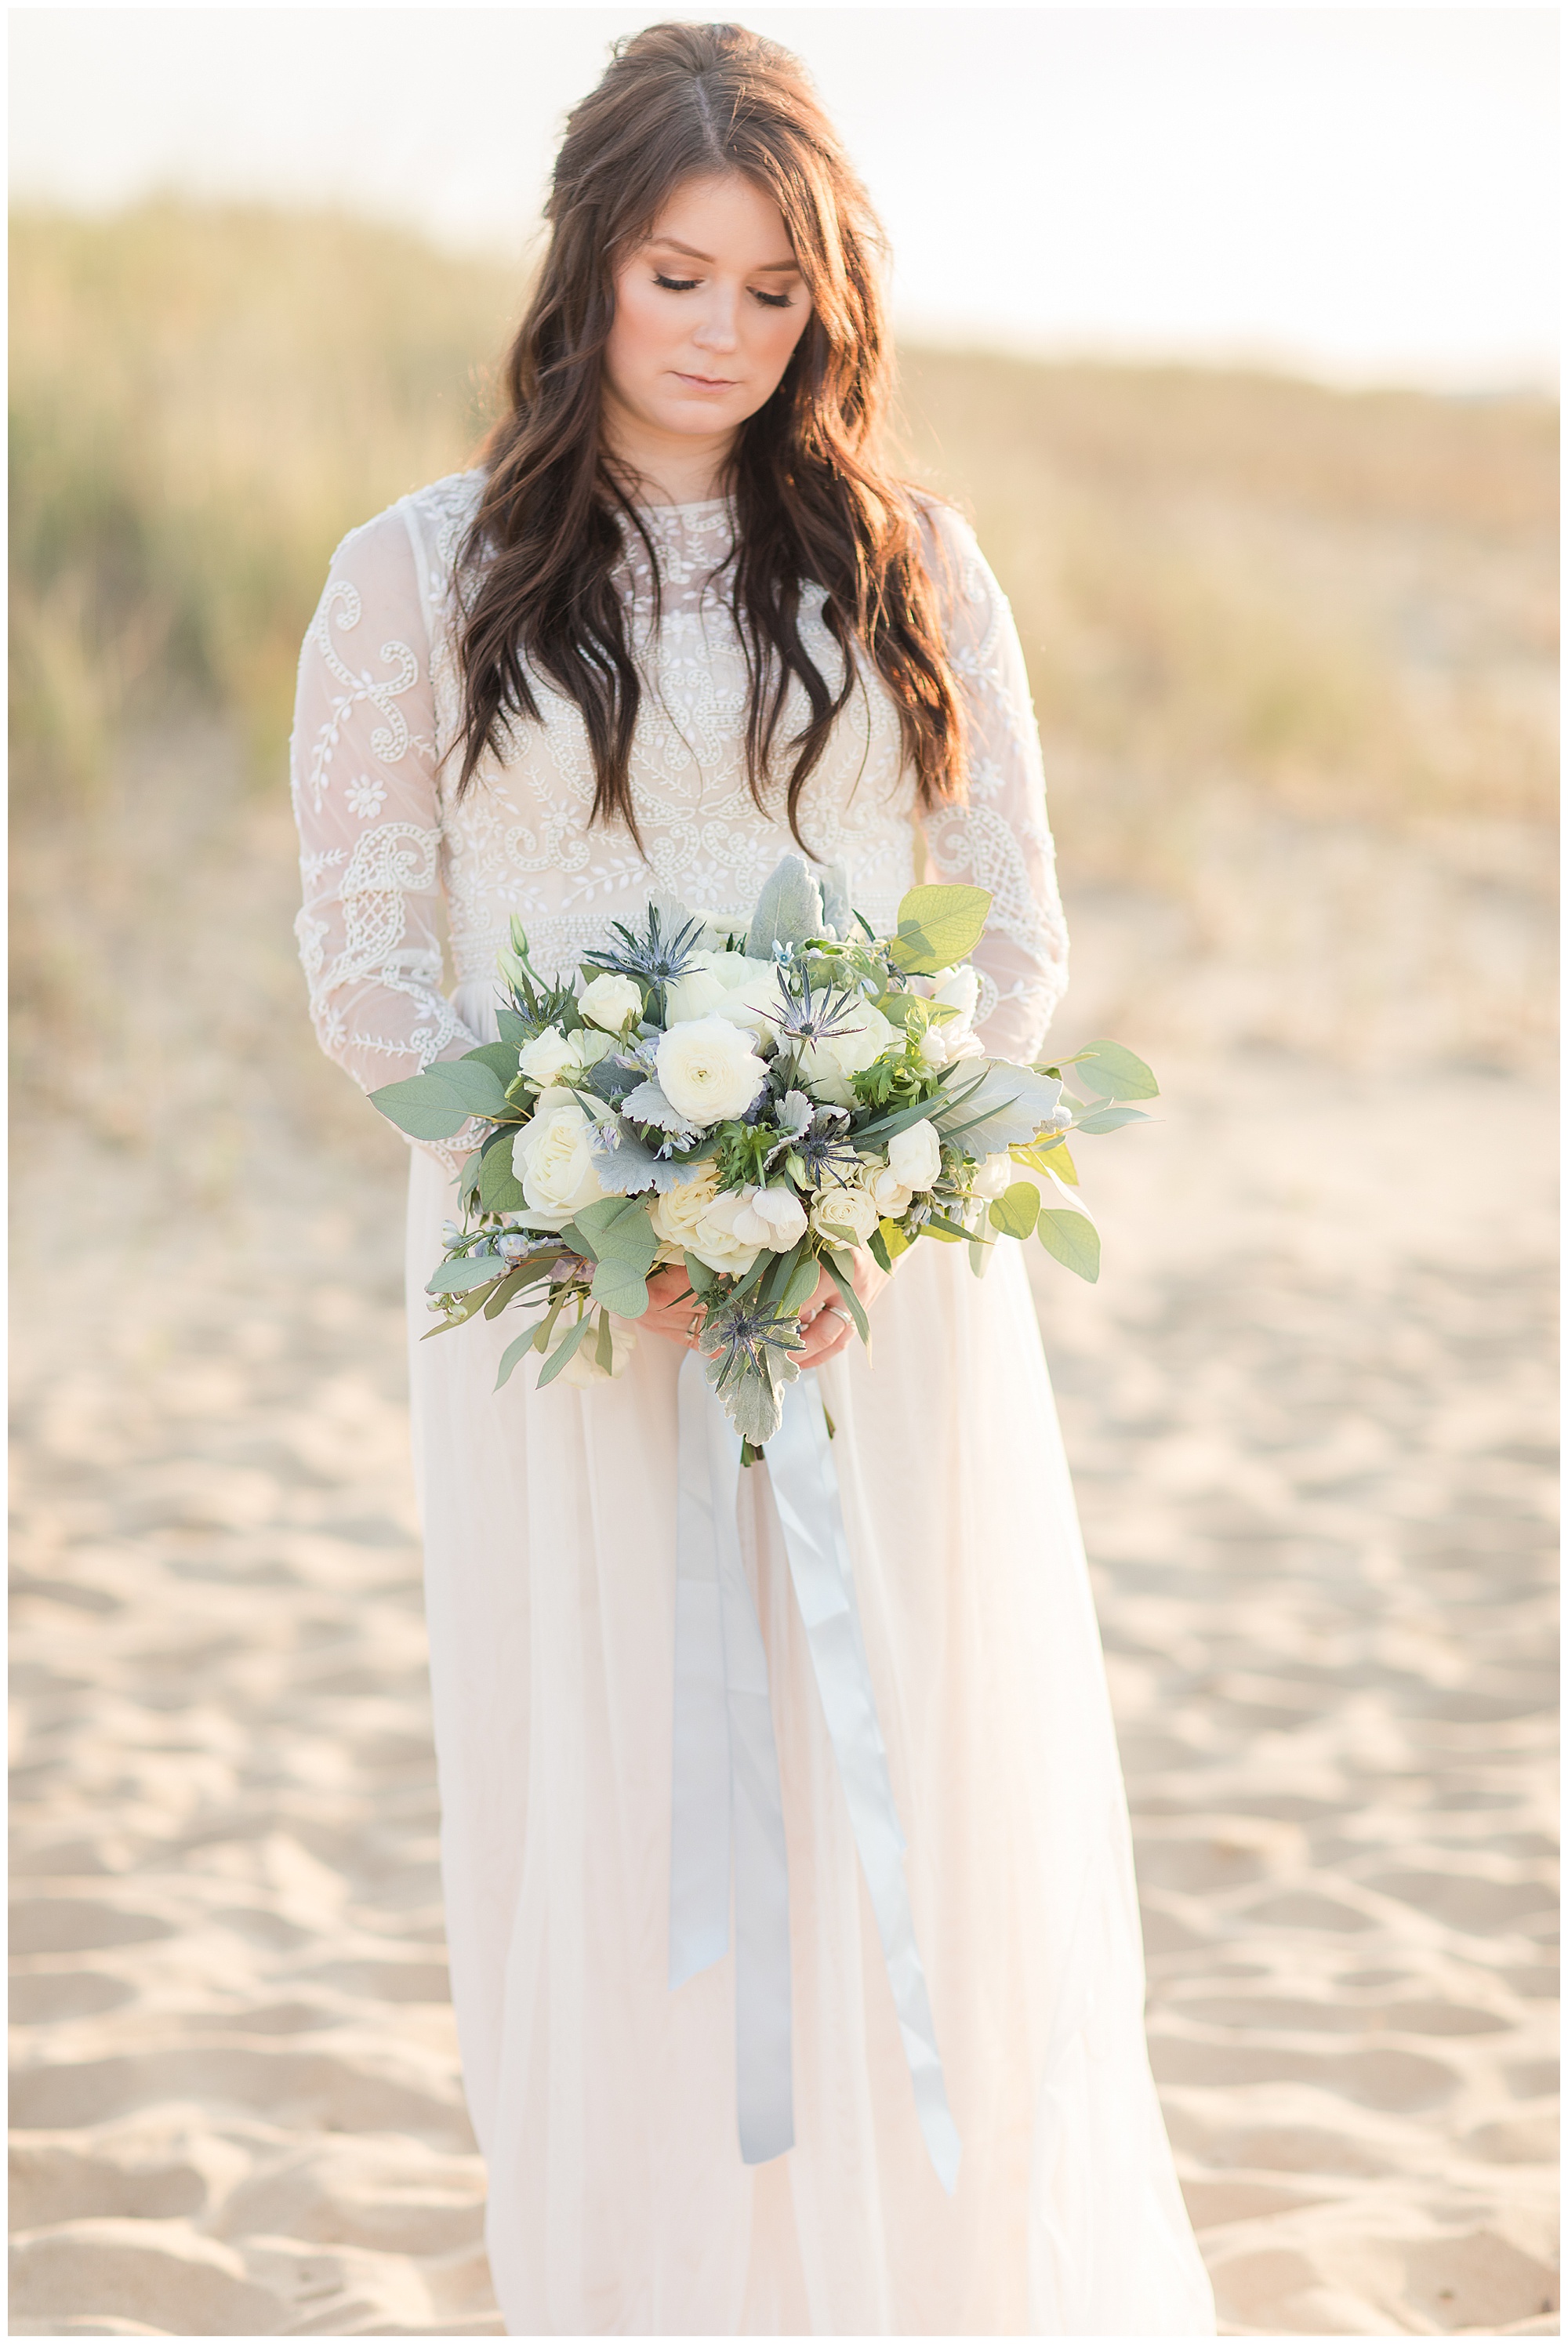 blushing floral designs by Alexandra, Kelley Stinson photography